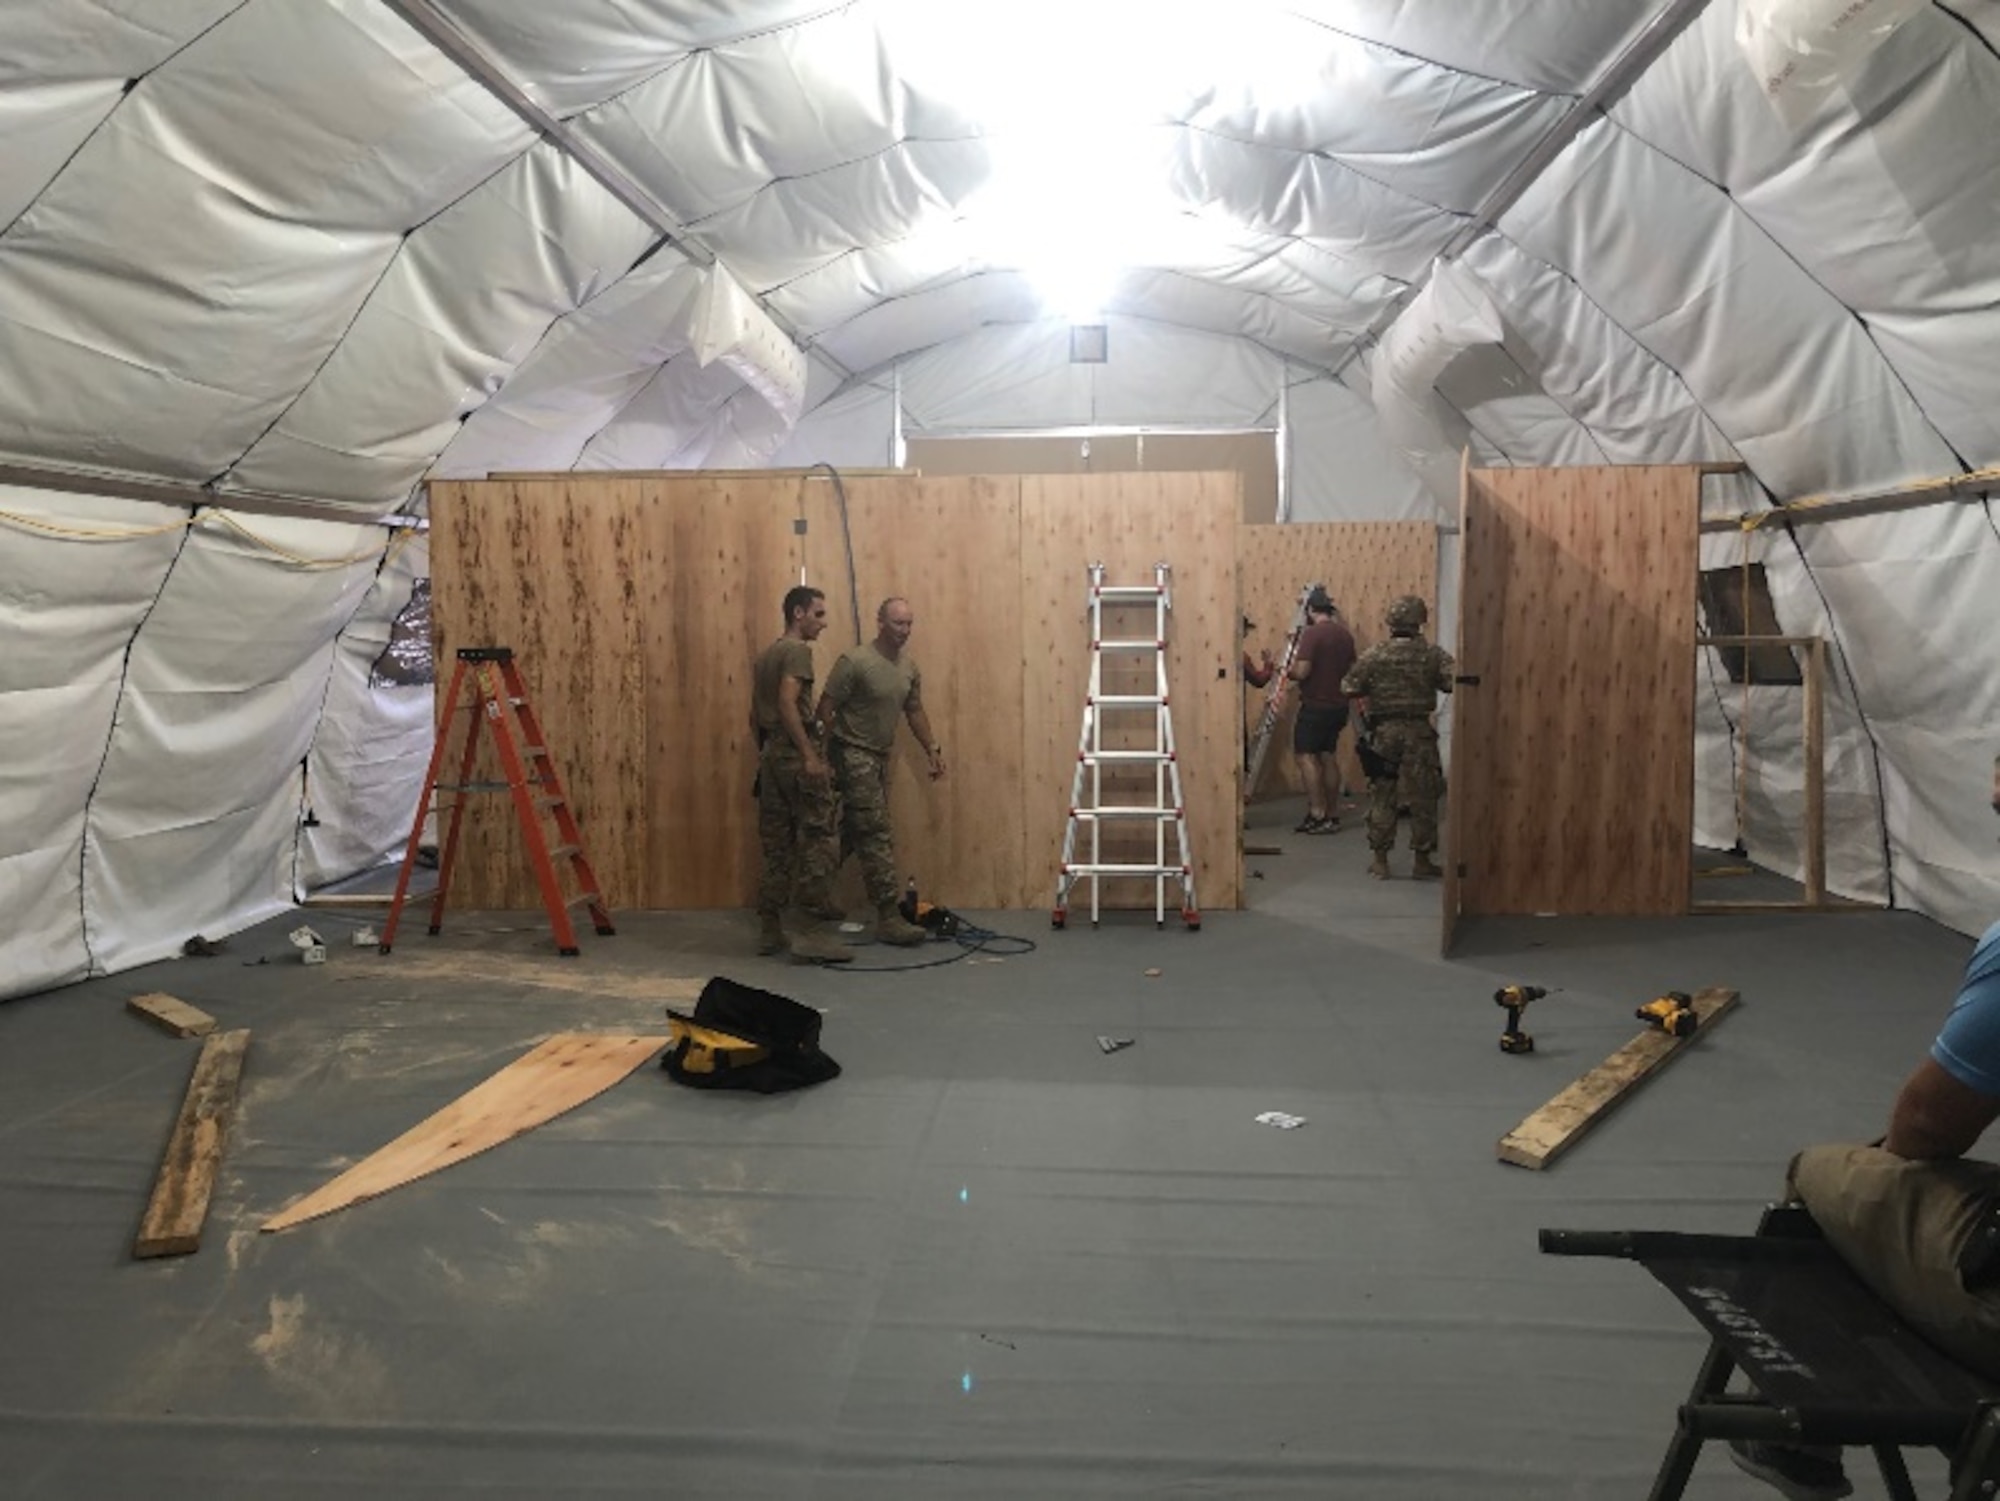 Airmen with the 435th Air Ground Operations Wing and the 435th Air Expeditionary Wing work together to construct a field resuscitative surgical tent at a base in East Africa, Dec. 15, 2020. Airmen of the 435th AGOW and 435th AEW took part in the movement of personnel and cargo to support Operation Octave Quartz. (Courtesy photo)